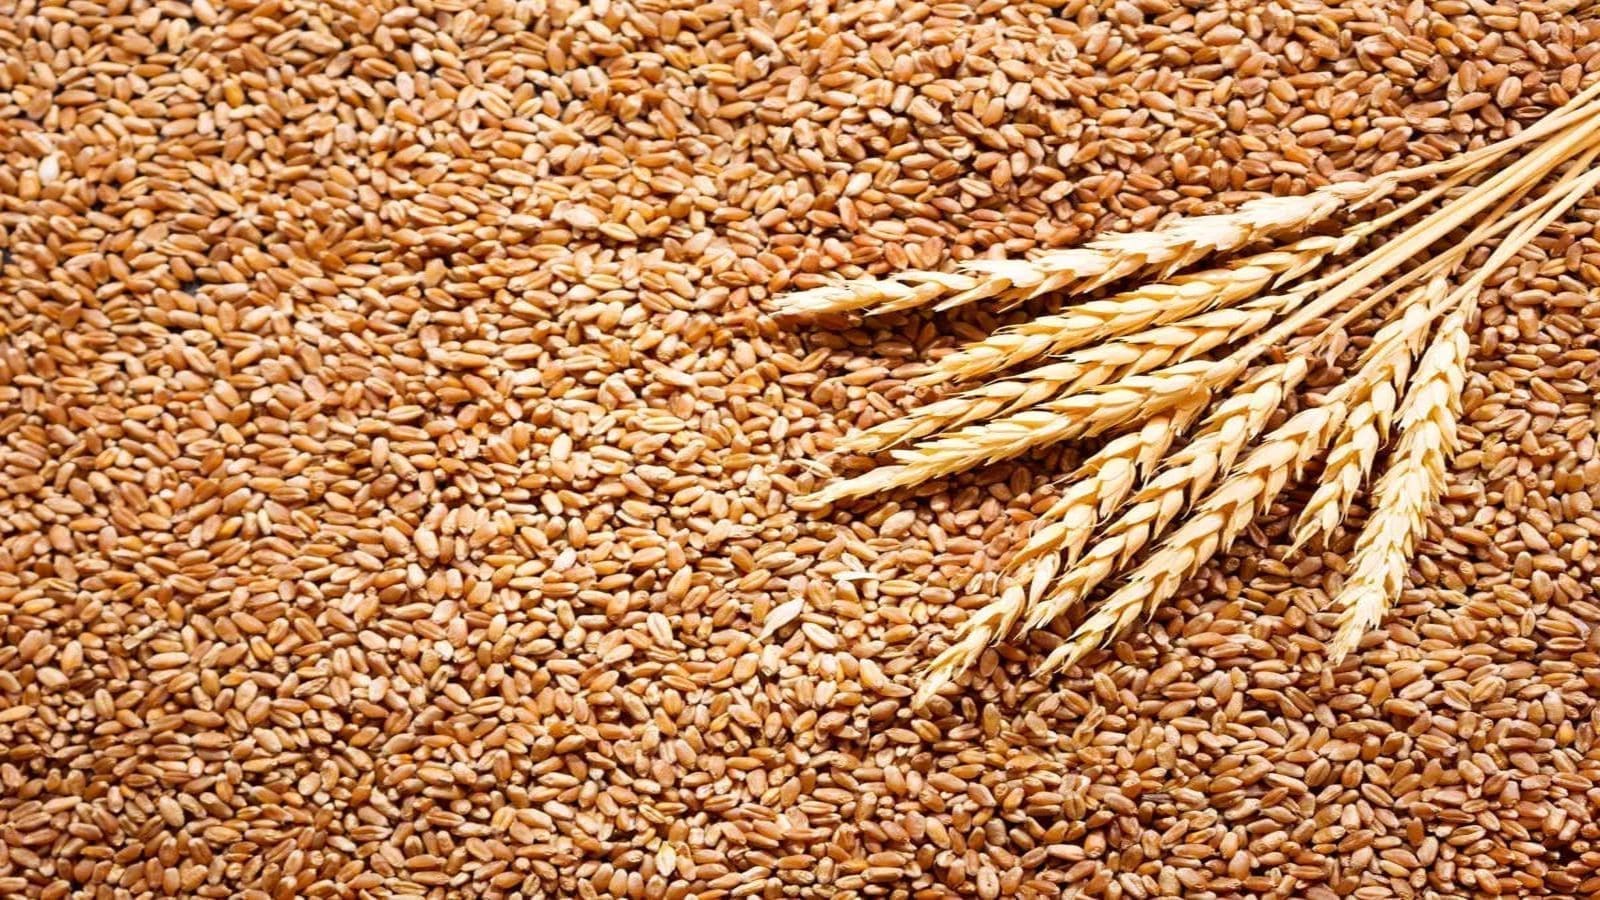 Egyptian Atomic Energy Authority scientists produce wheat resistant to salinity, water shortage